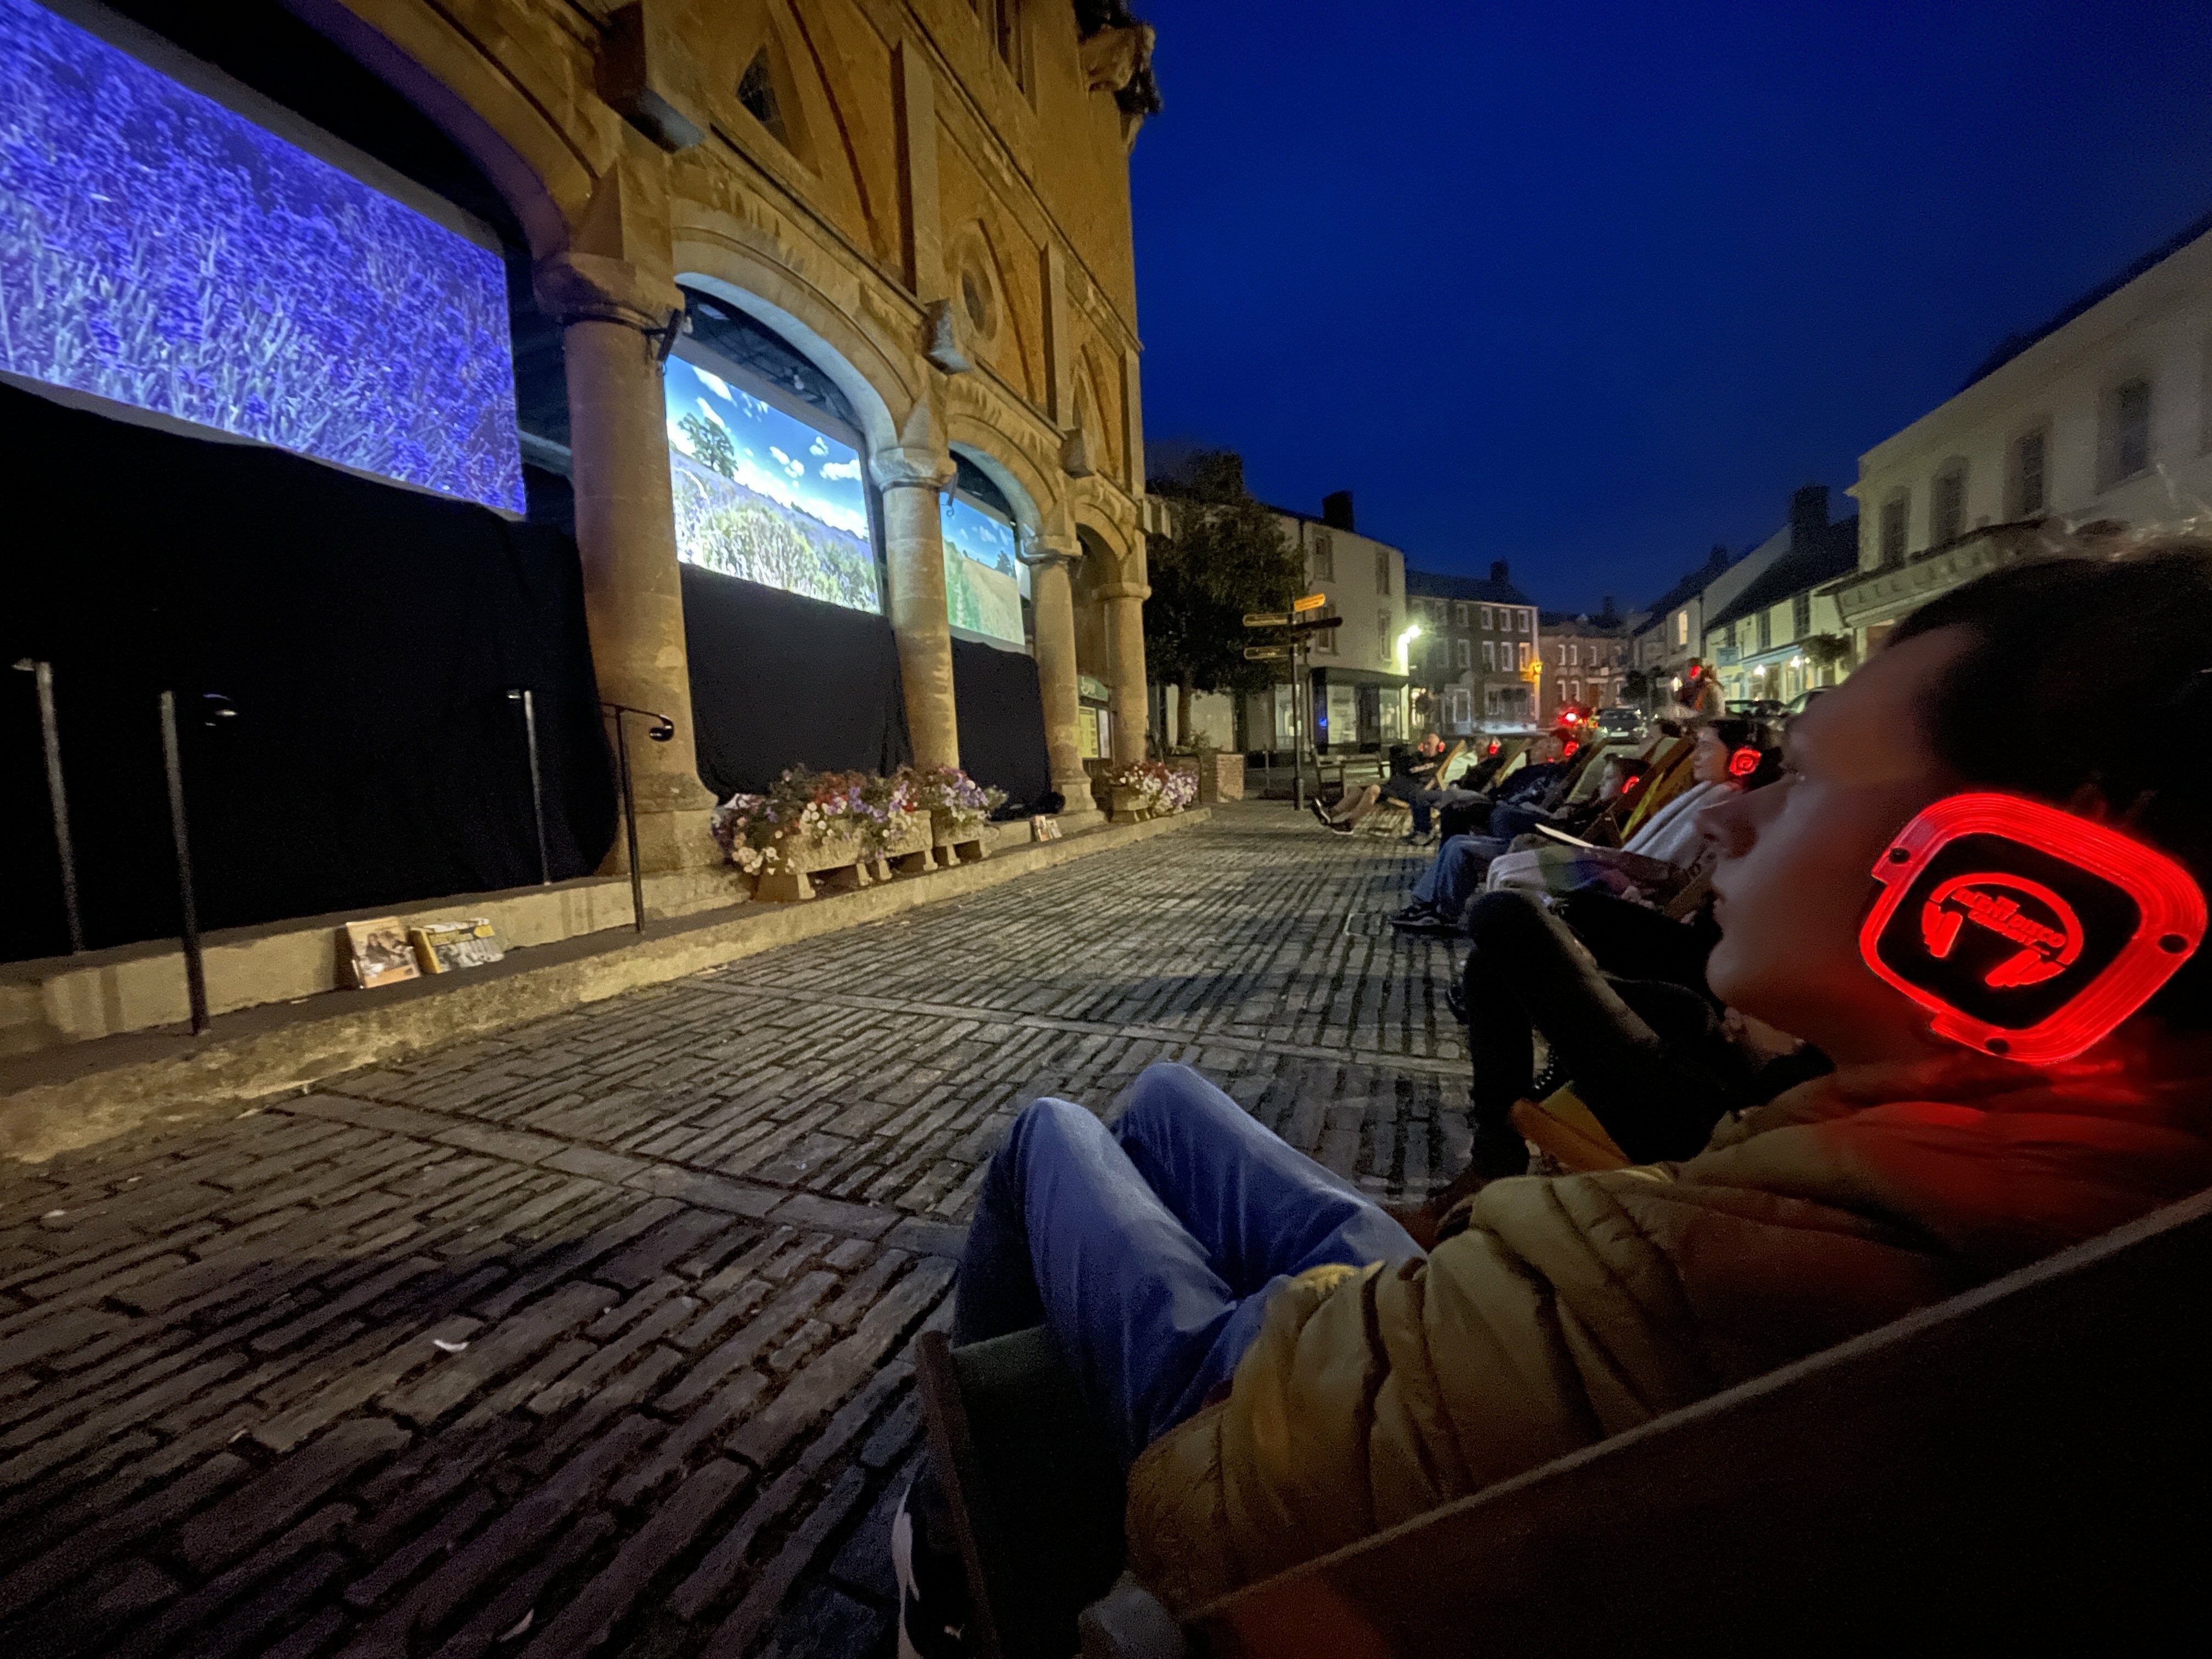 A group of people sitting in a public space watching a multi screen film installation projected on the side of a historical building.